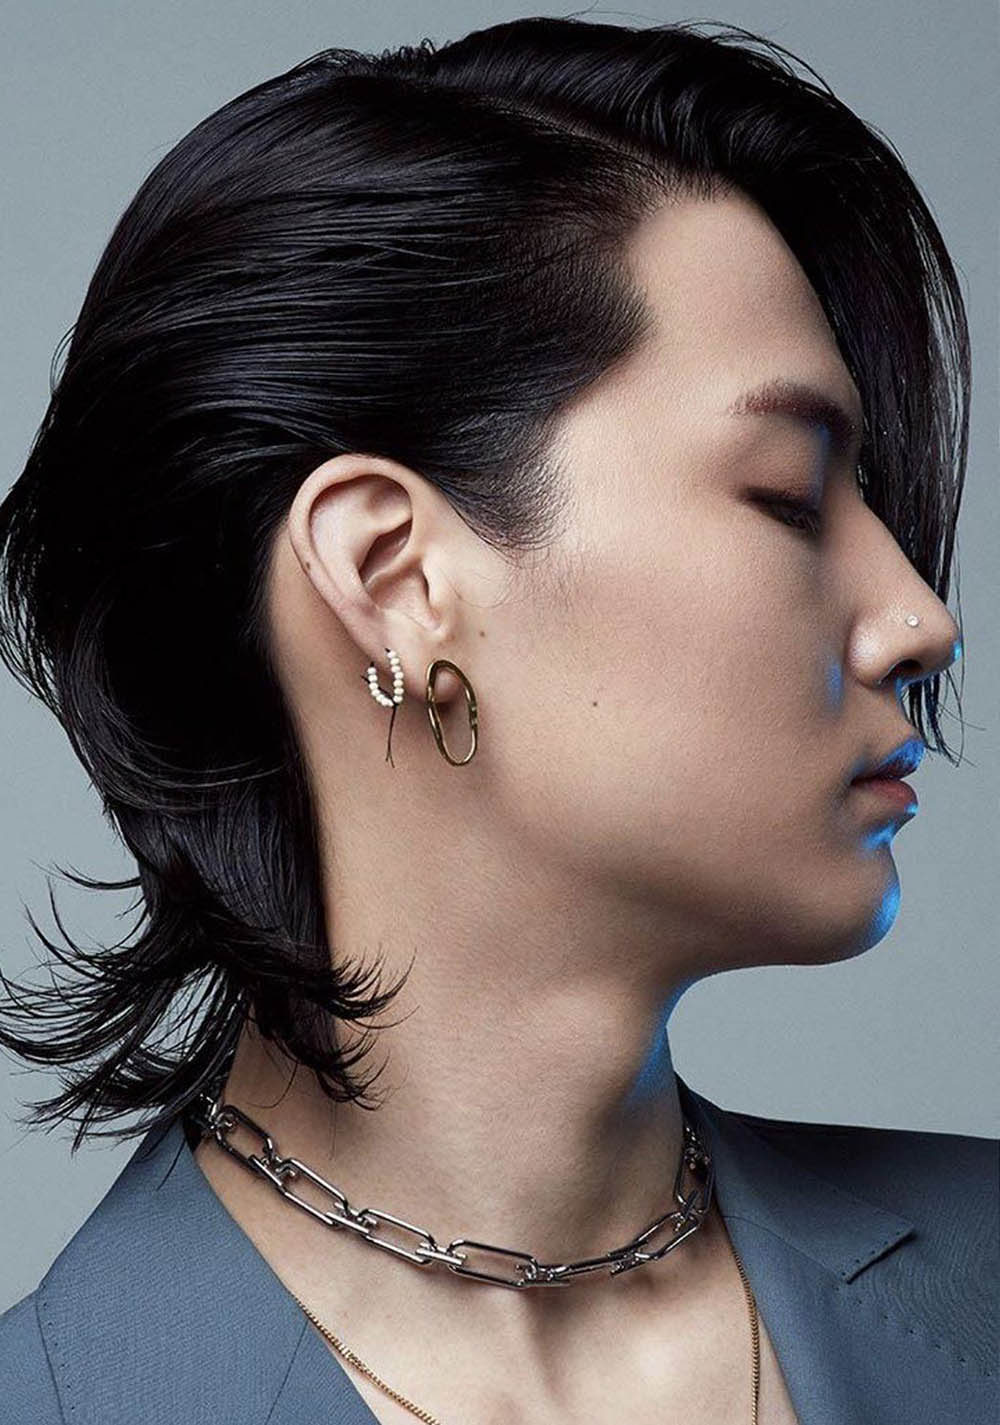 GOT7’s JB covers Allure May 2020 Digital Edition by Ahn Jooyoung